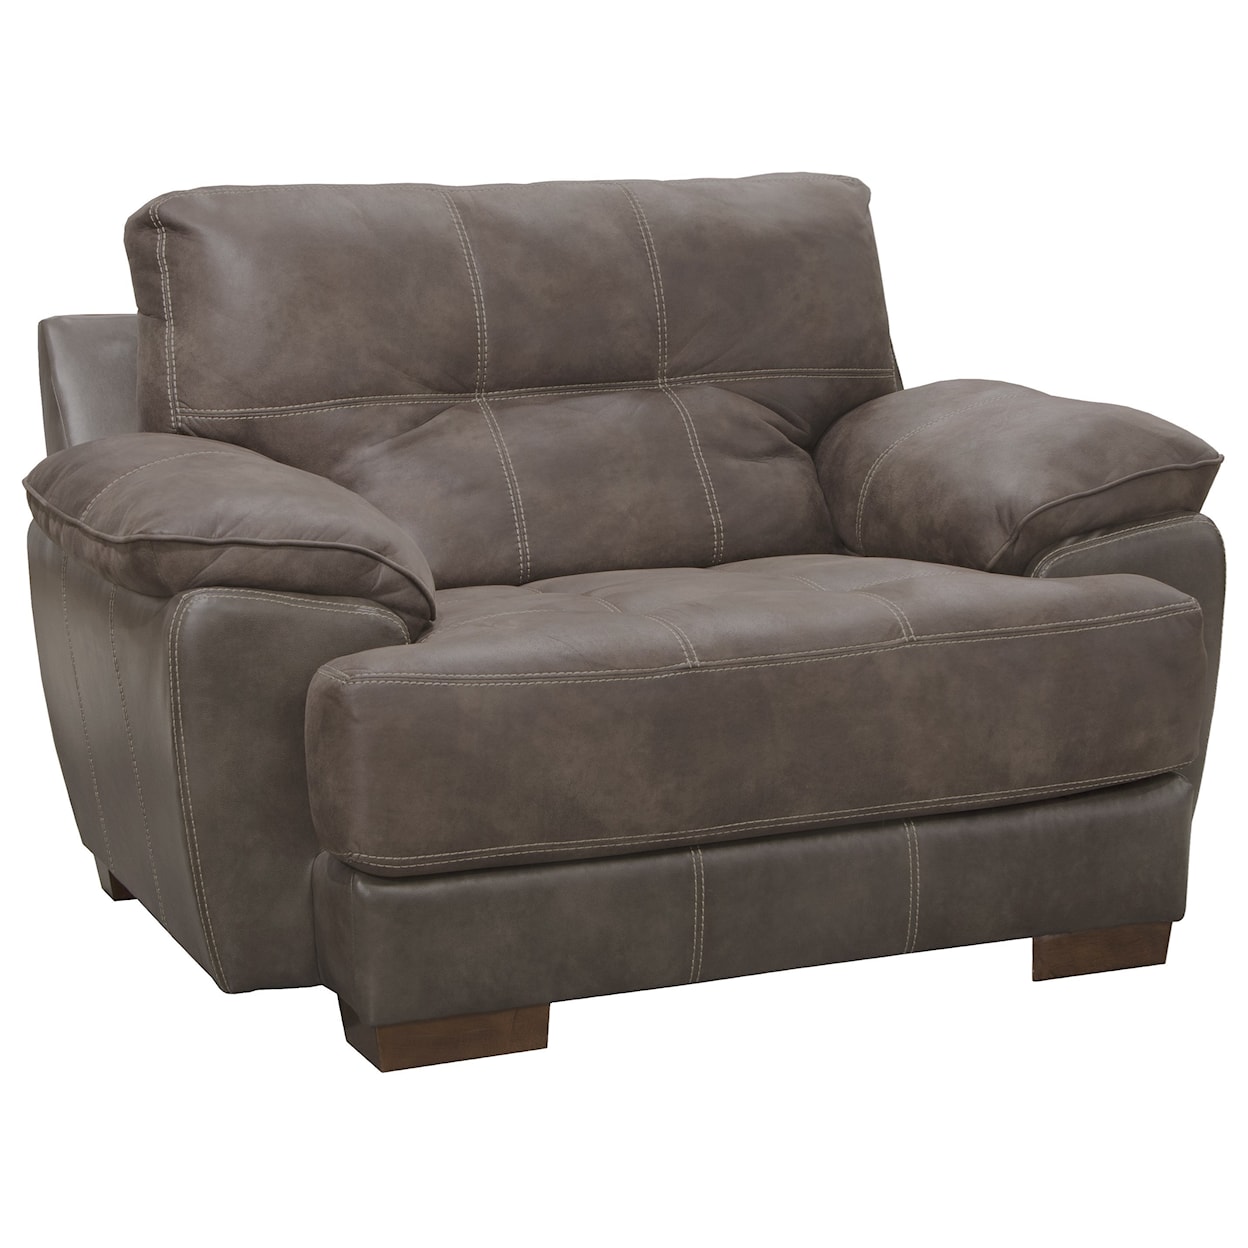 Jackson Furniture 4296 Drummond Chair and a Half